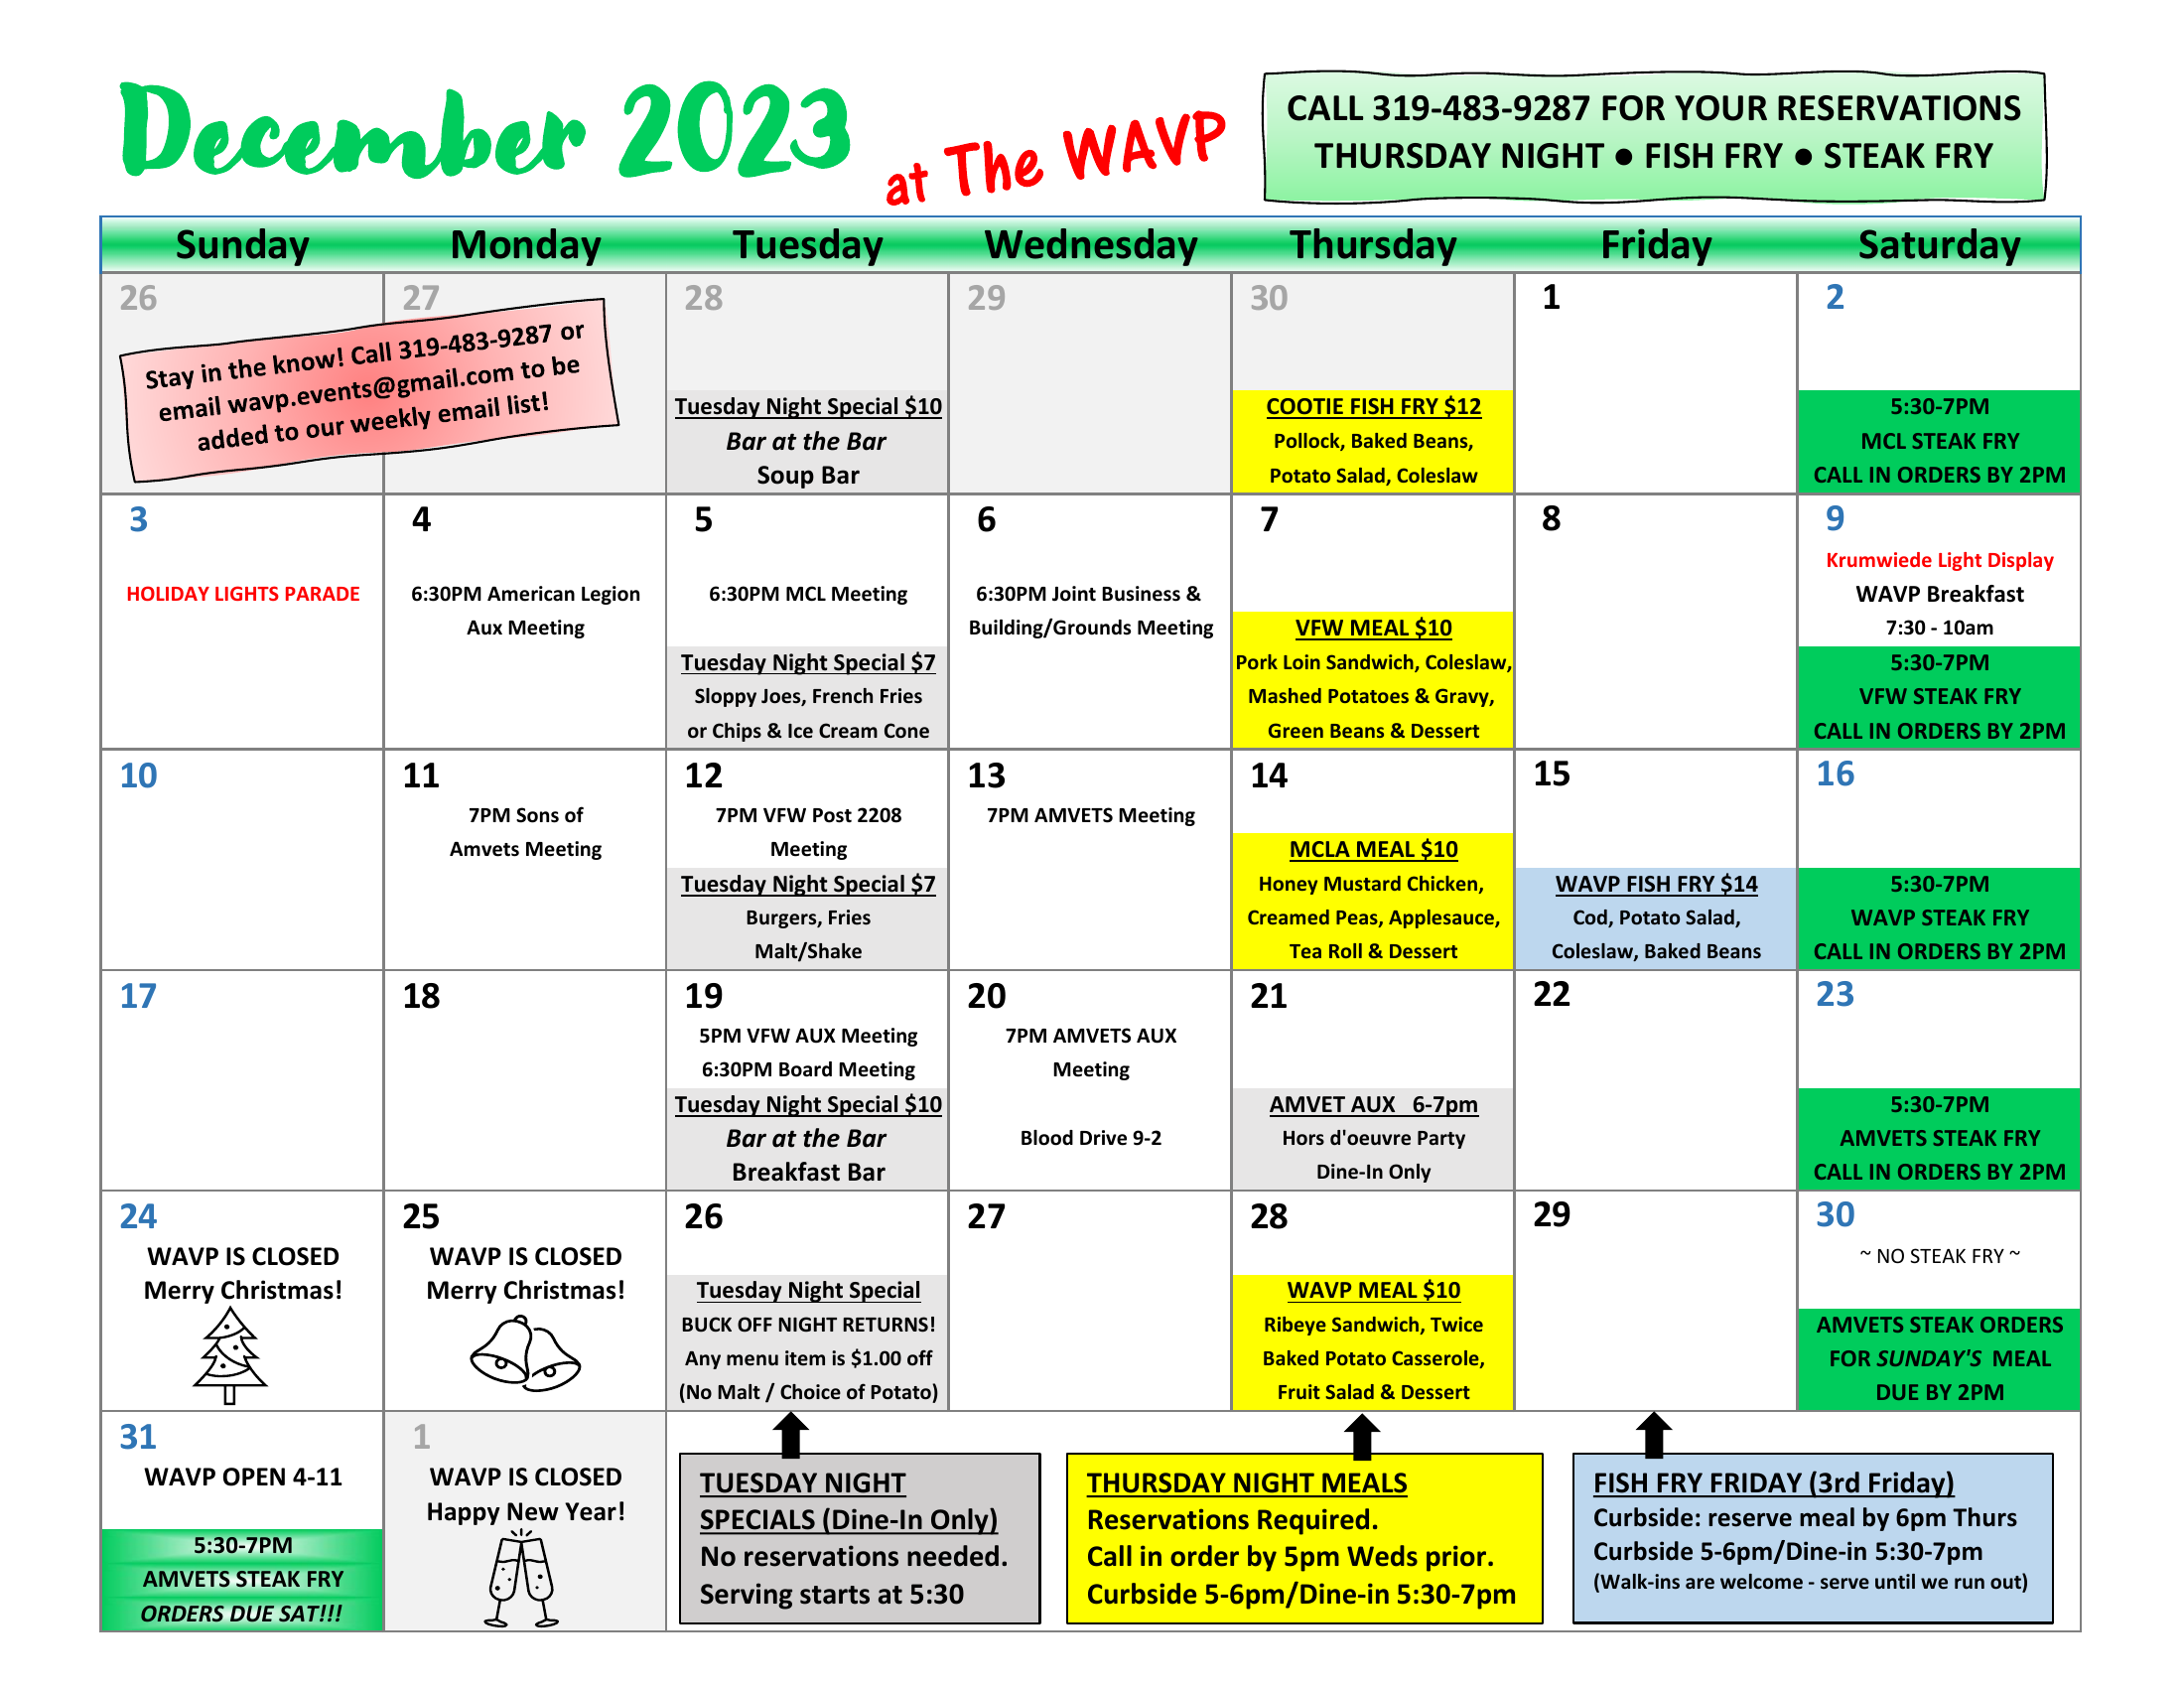 The WAVP Events Calendar for the month of December 2023